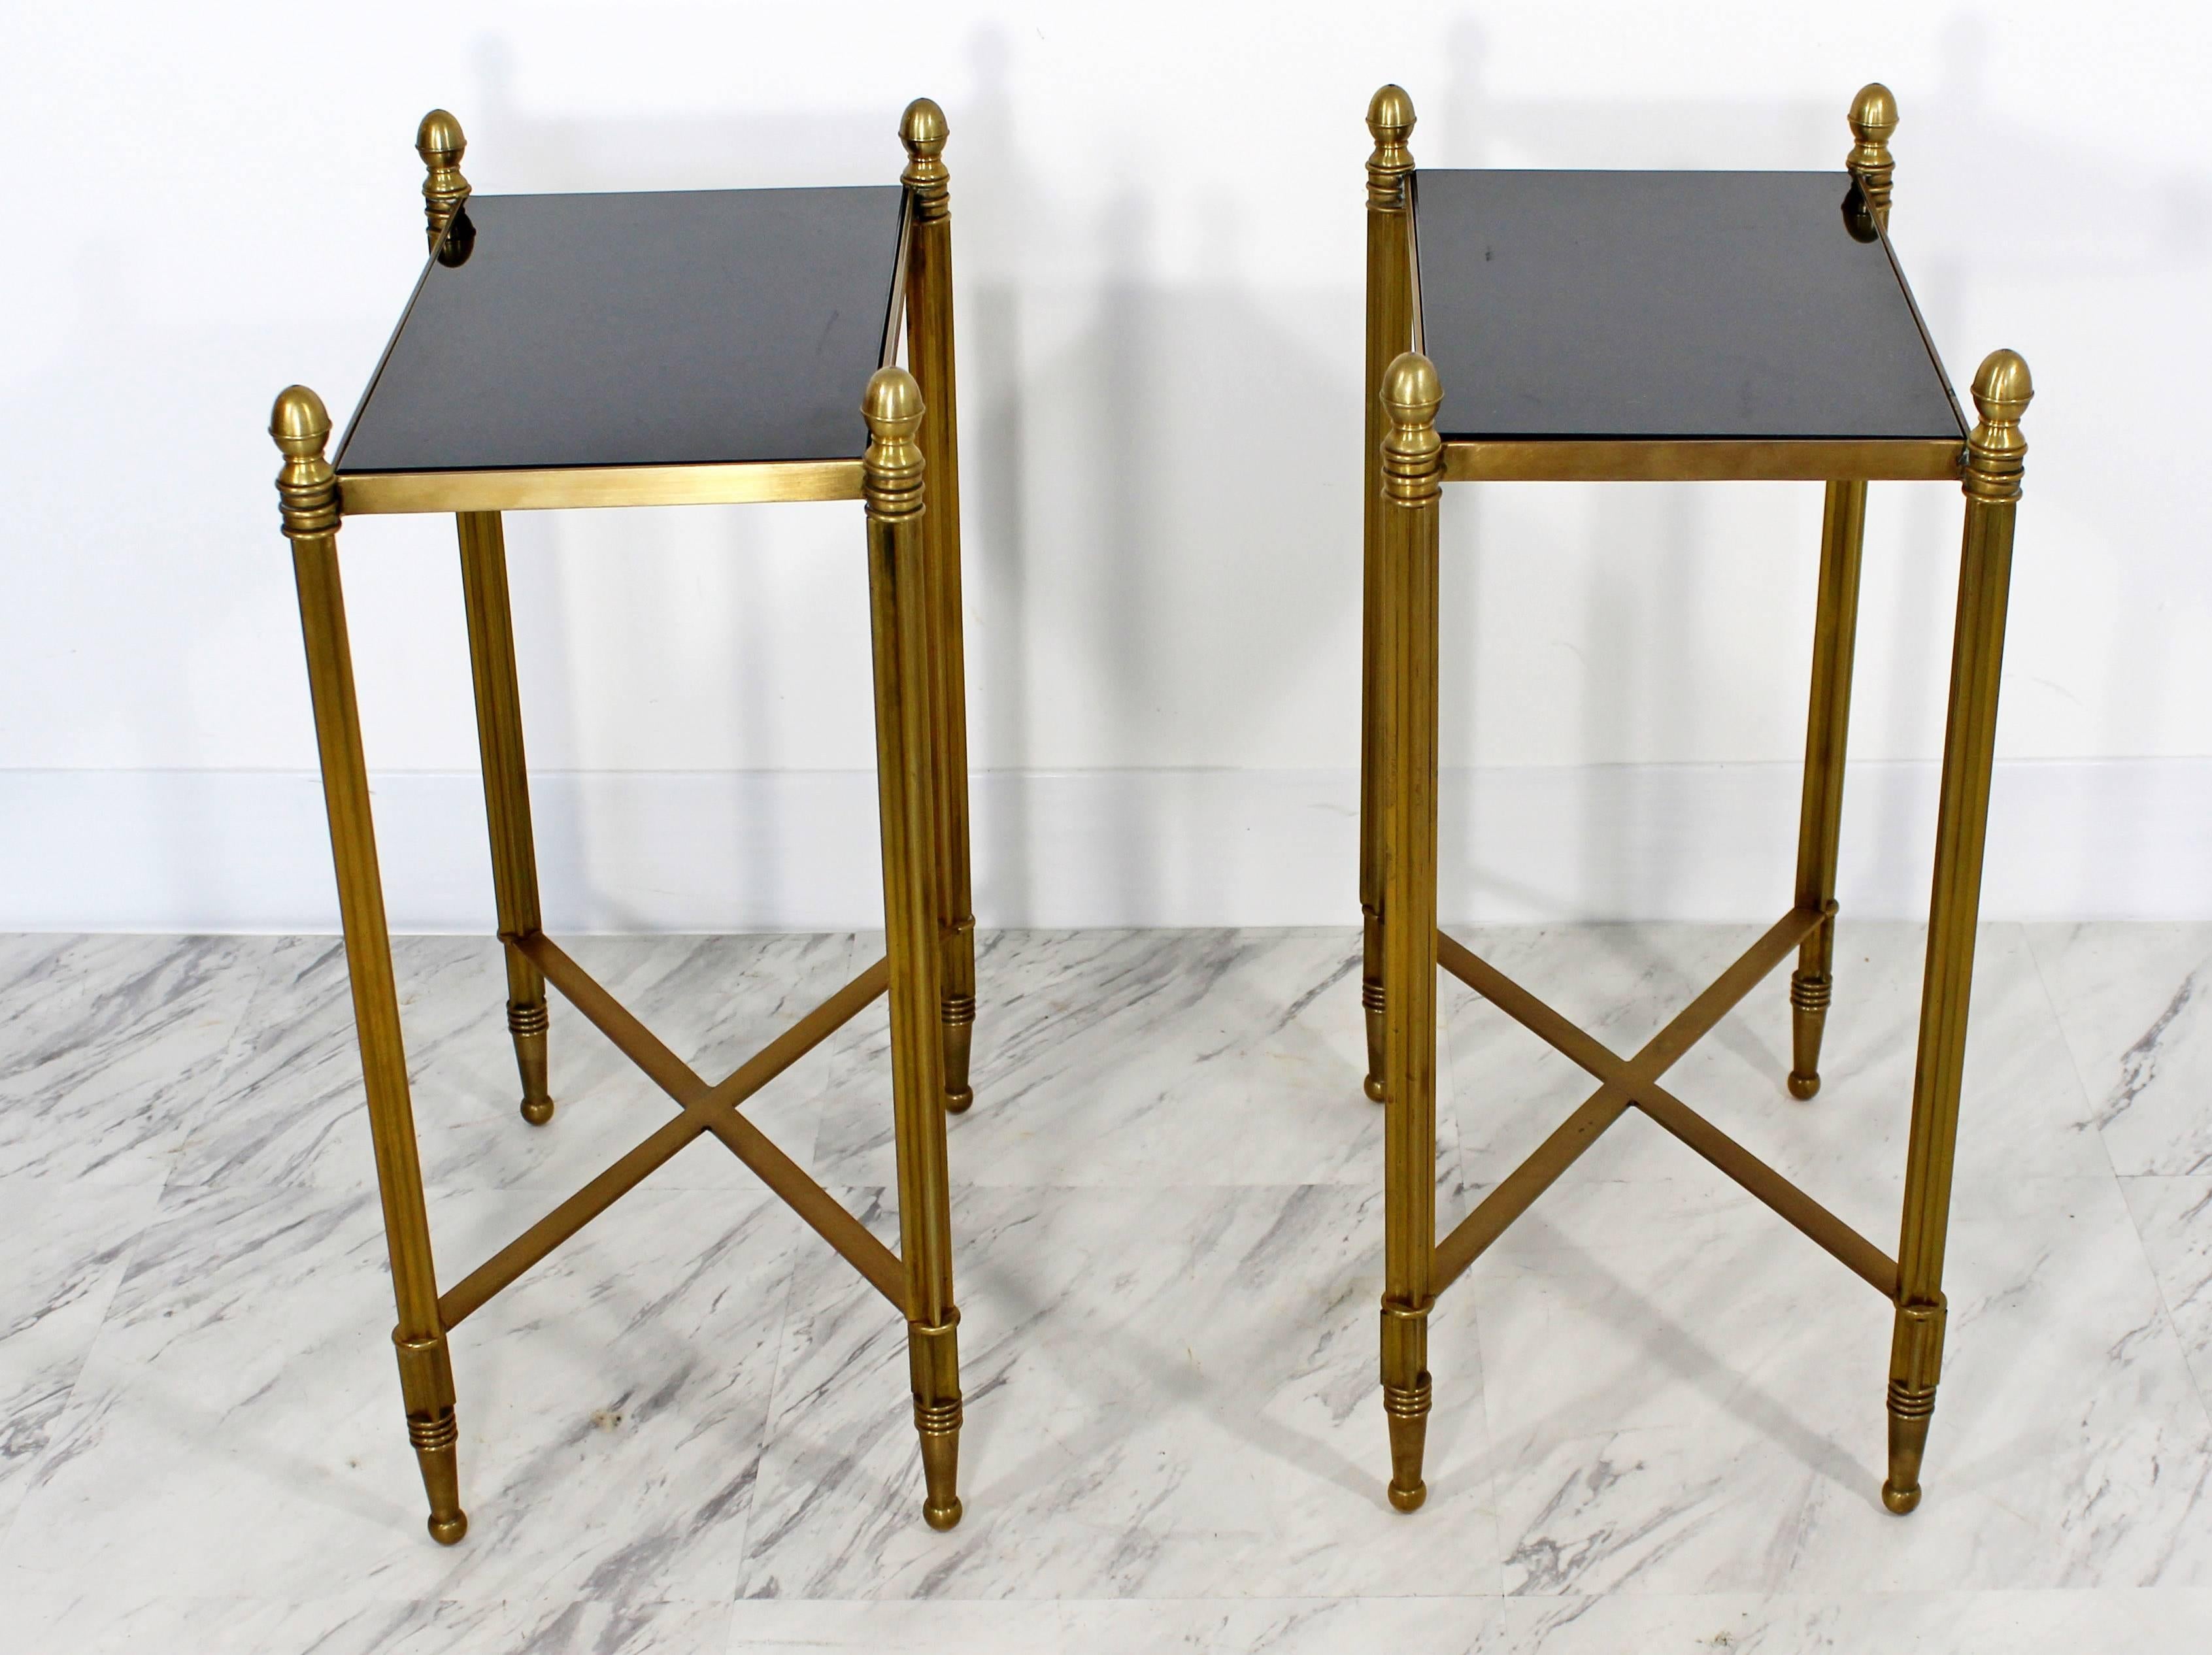 For your consideration is a beautiful, sturdy pair of bronze, acorn side tables, with black granite tops, from Global Views Furniture. In excellent condition. The dimensions are 9